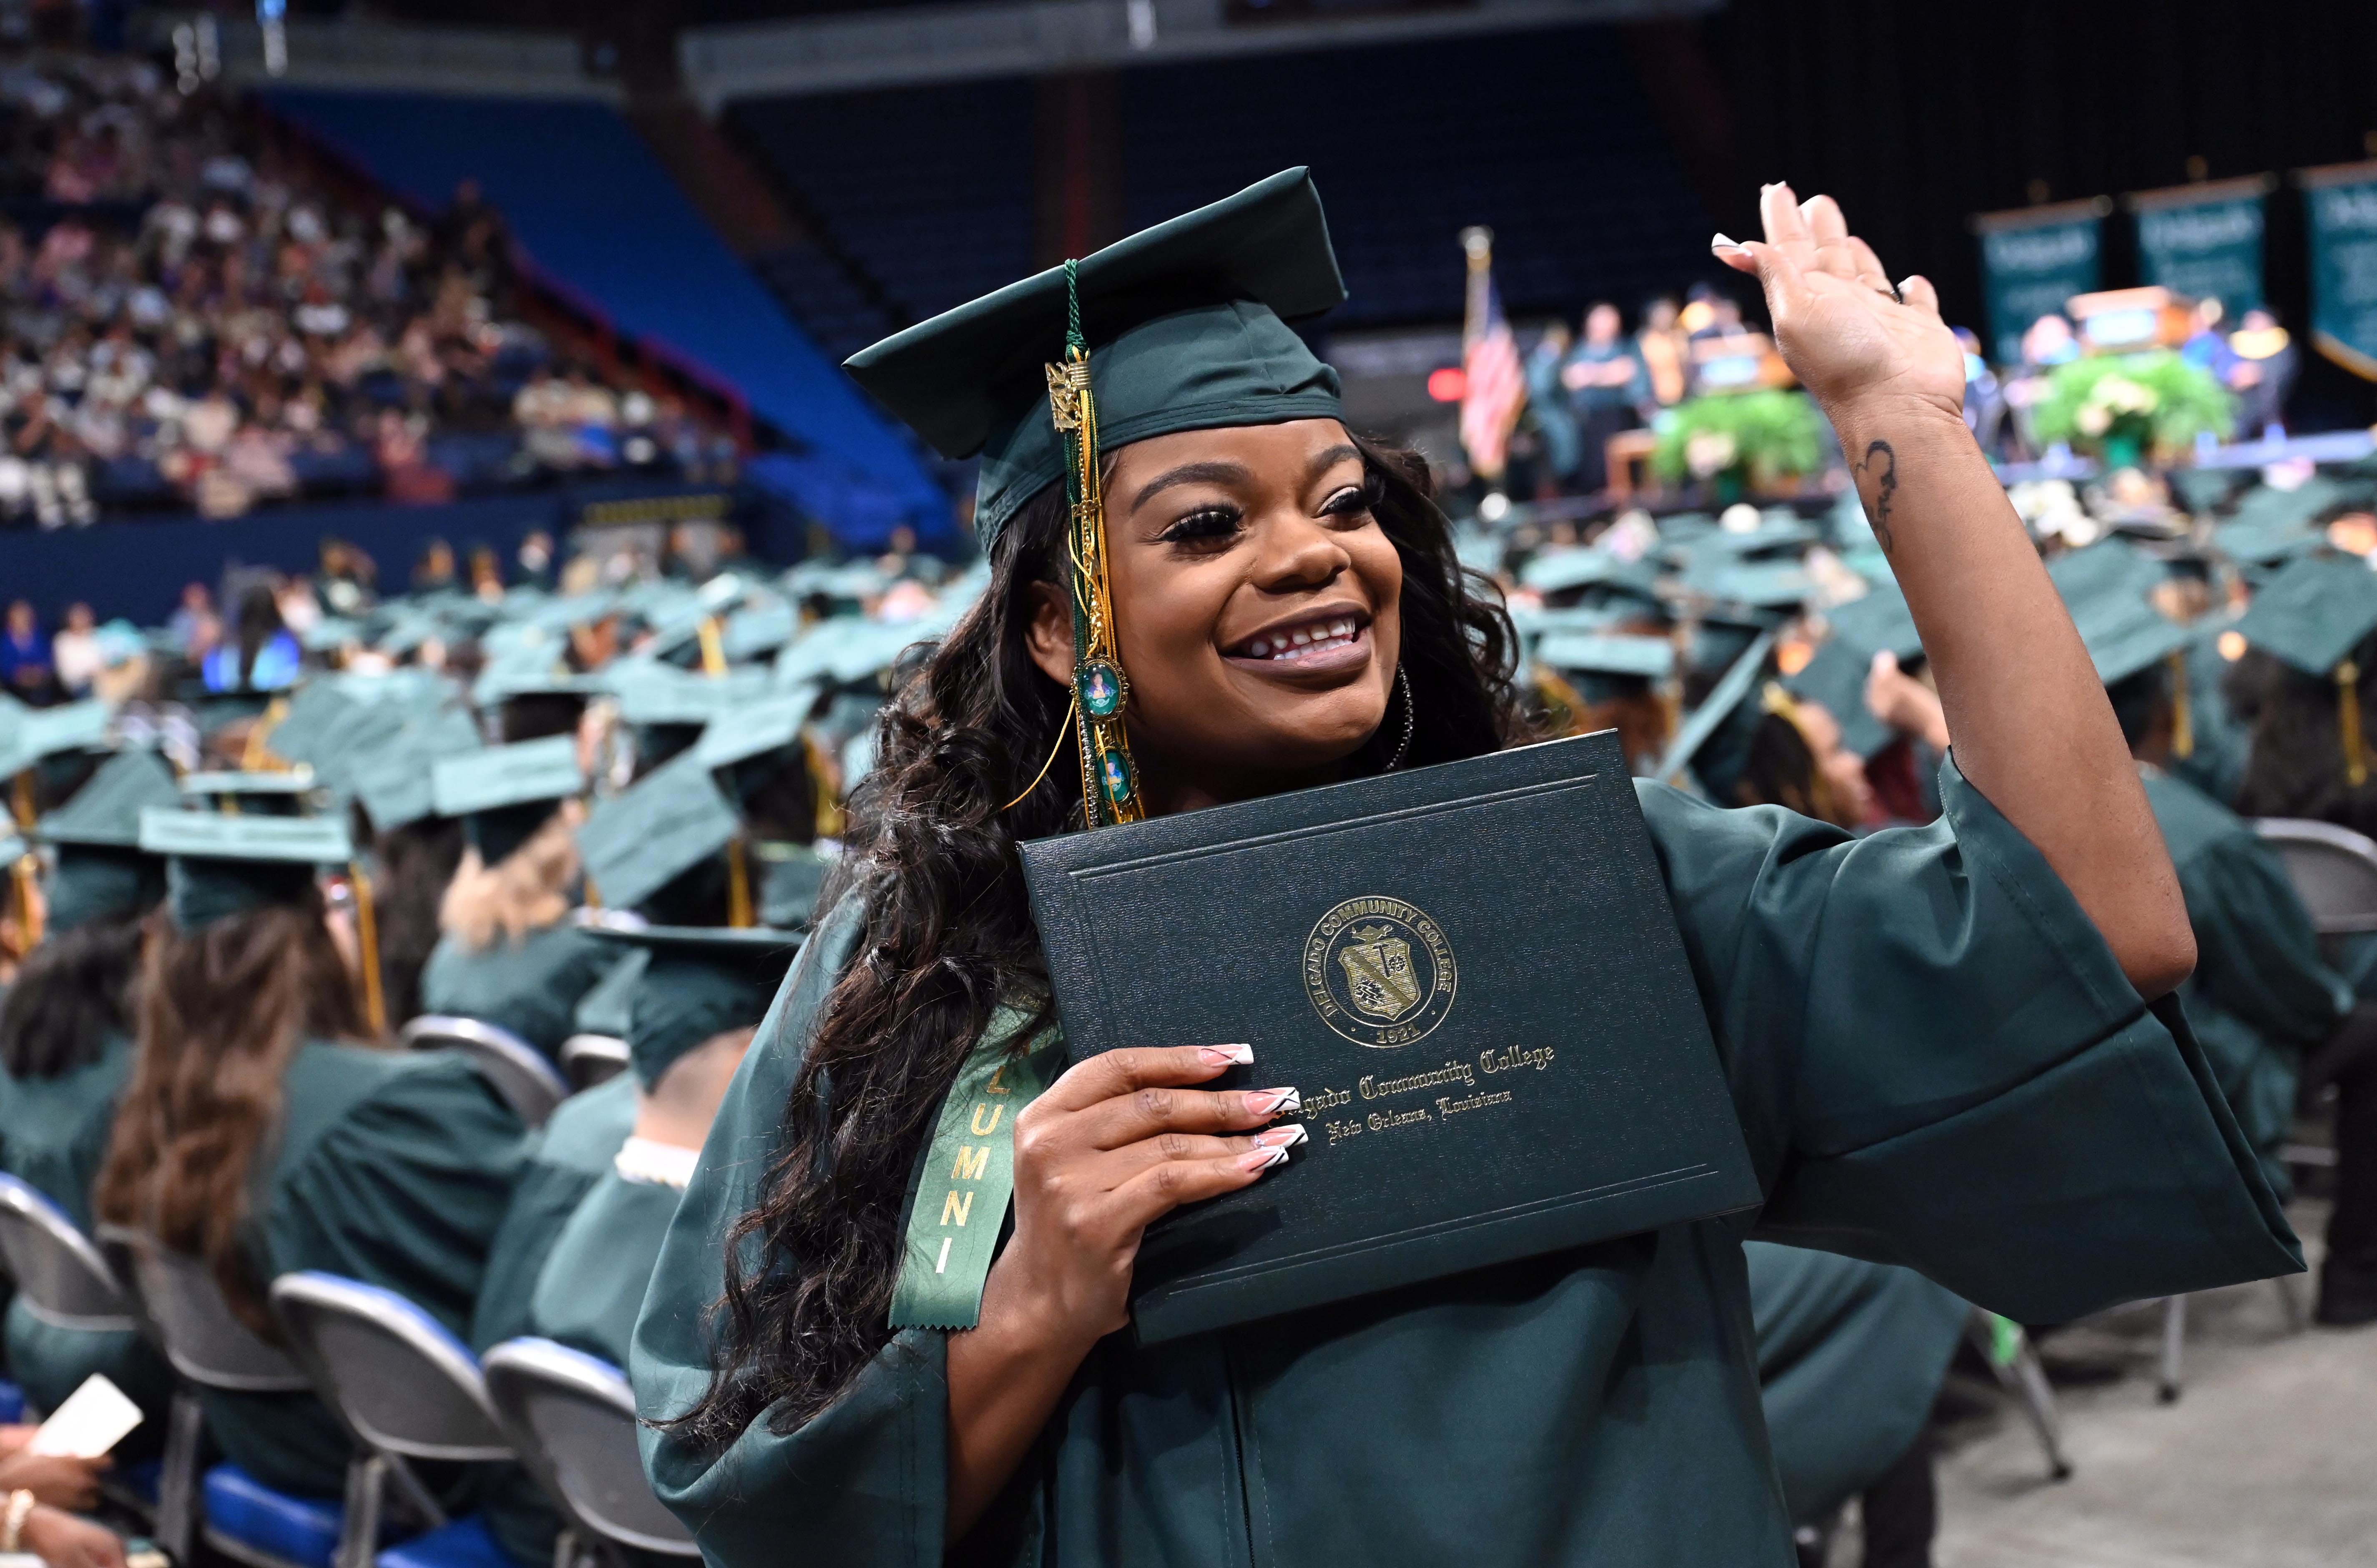 A graduate waves to the crowd while holding a diploma cover